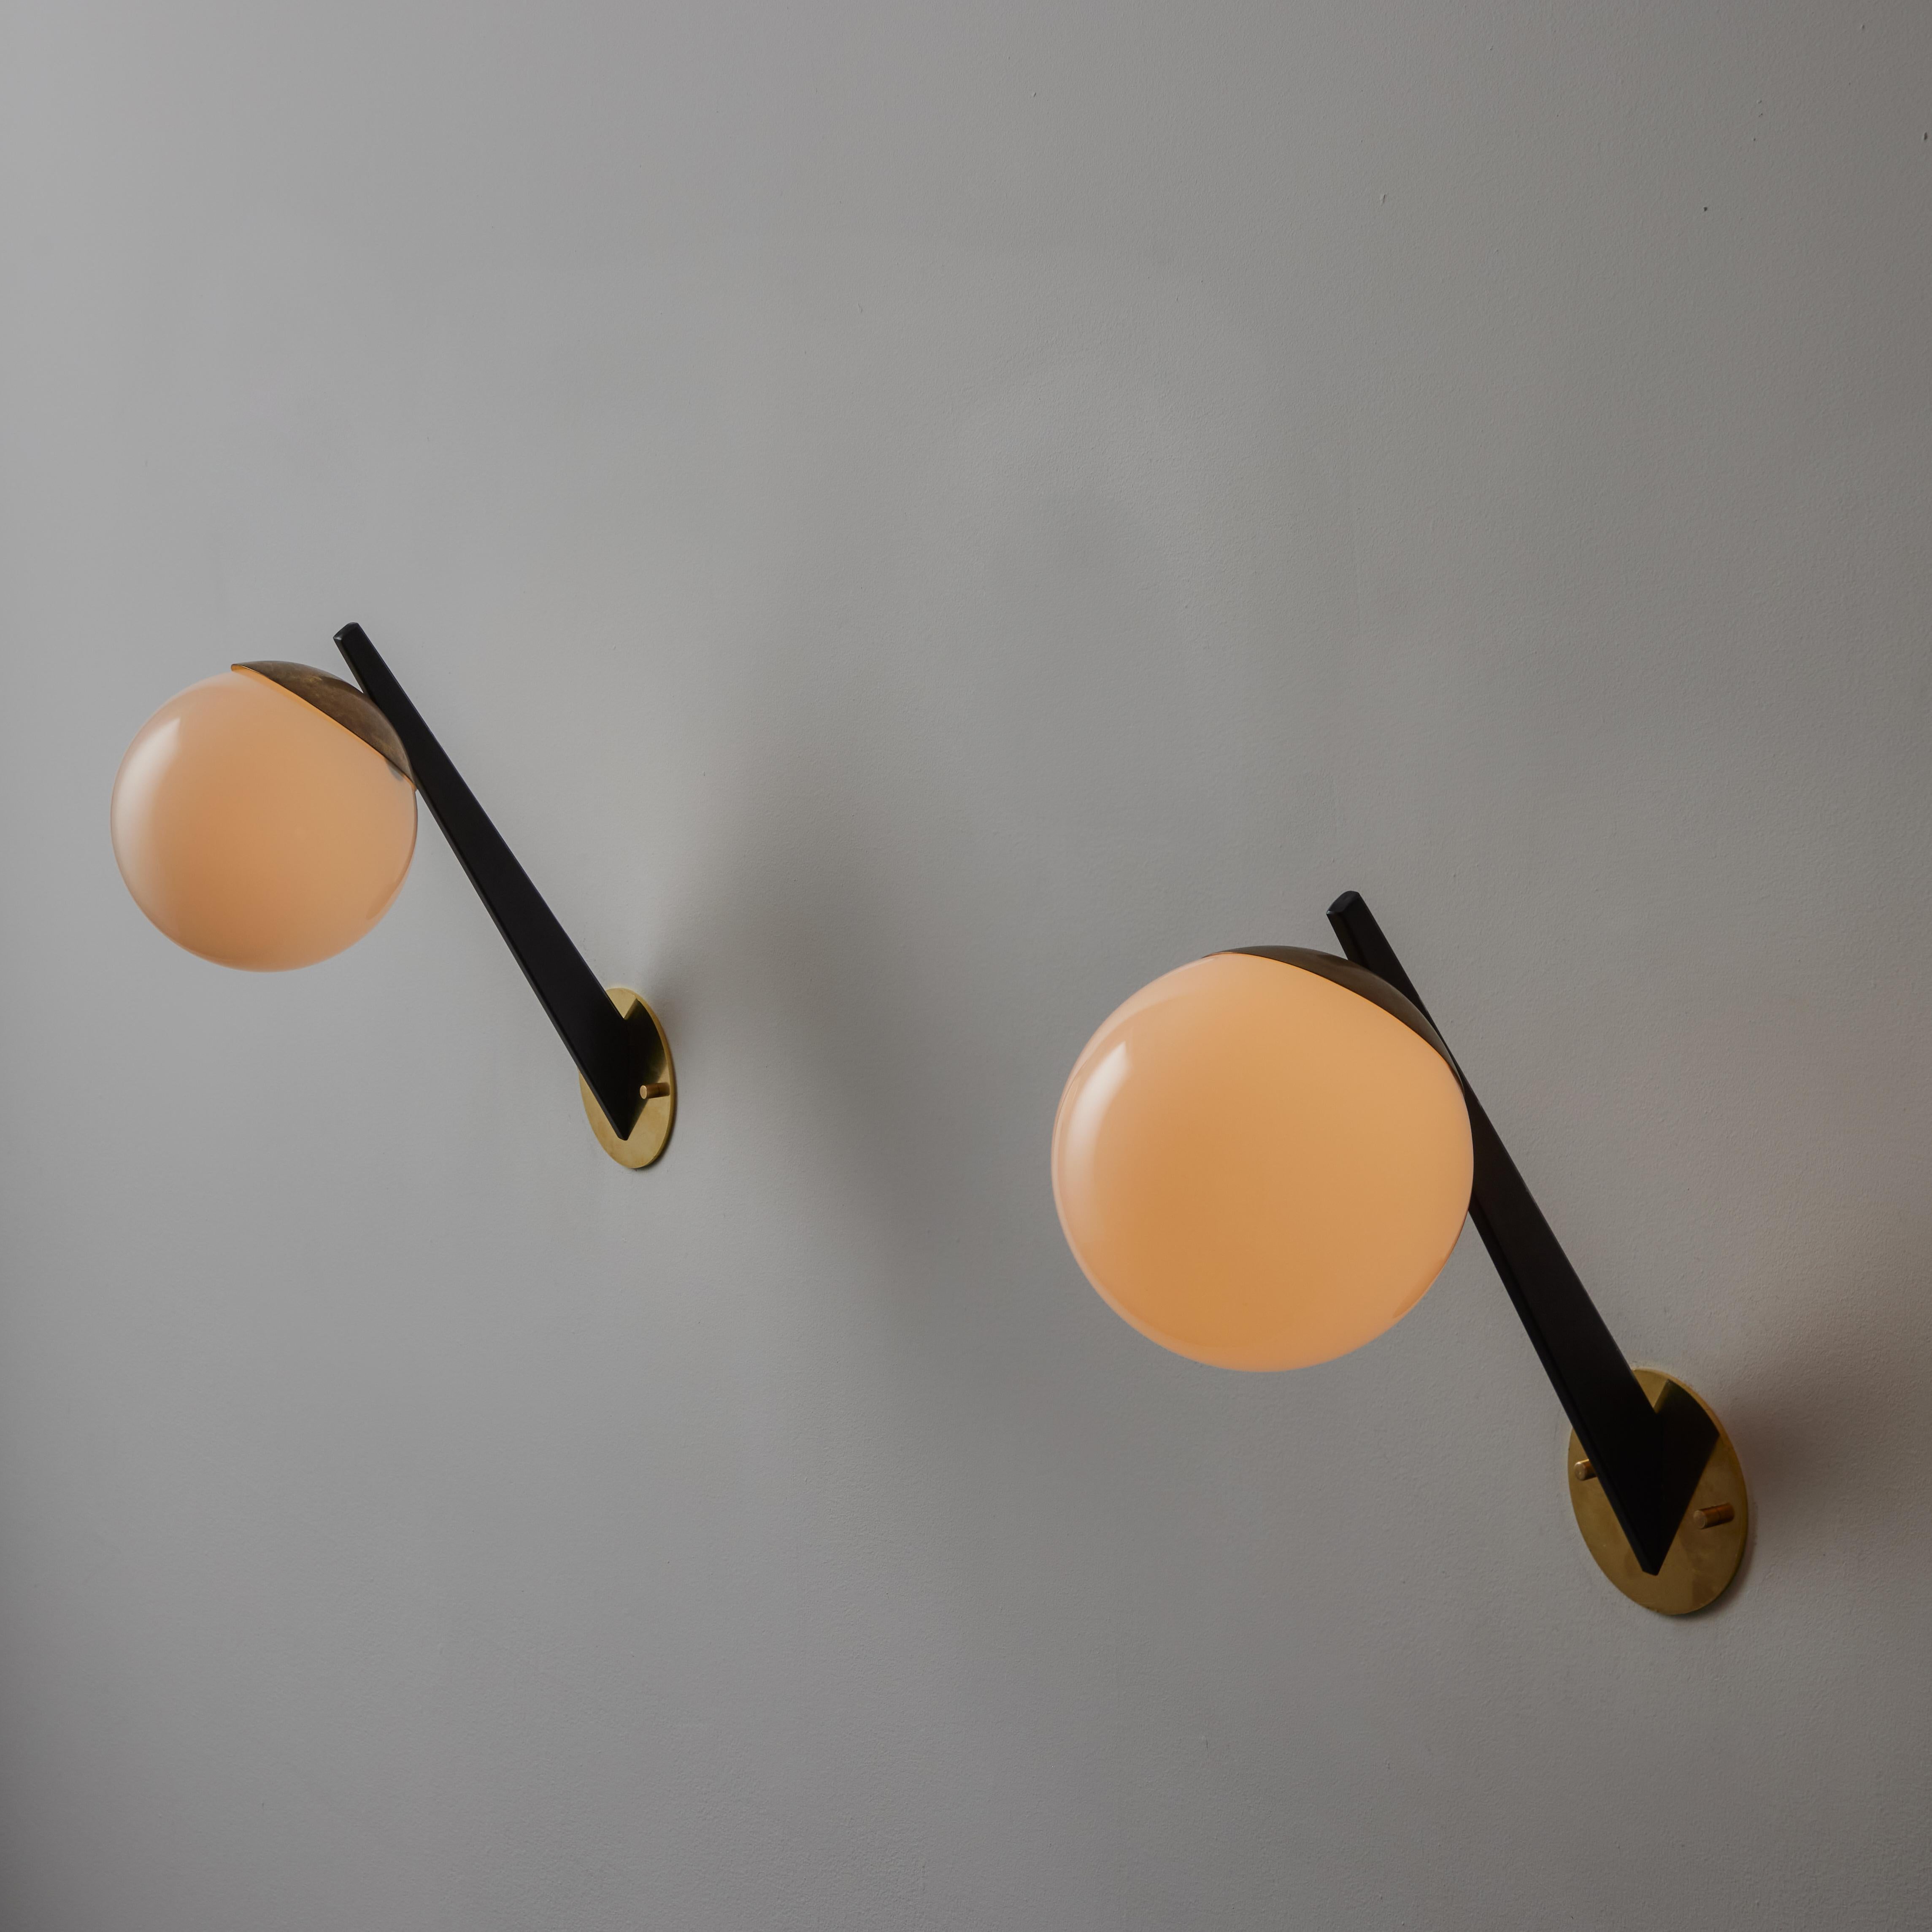 Pair of Sconces by Stilnovo. Designed and manufactured in Italy, circa the 1950s. Angular black enameled armatures paired with white opaline glass diffusers. Each sconce holds and e14 socket type adopted for the US. We recommend a 40 W or LED